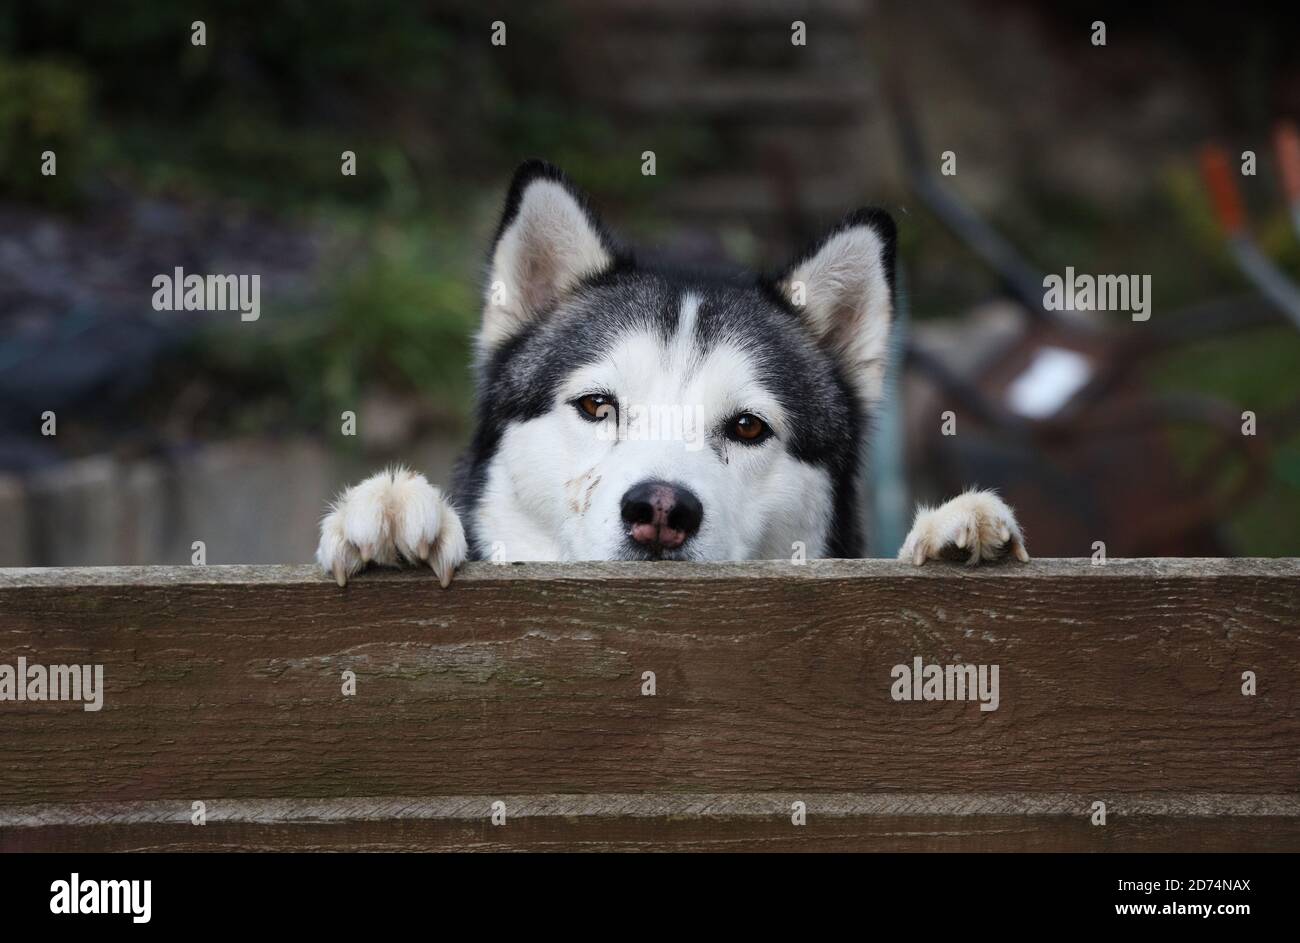 Husky looking over a fence Stock Photo